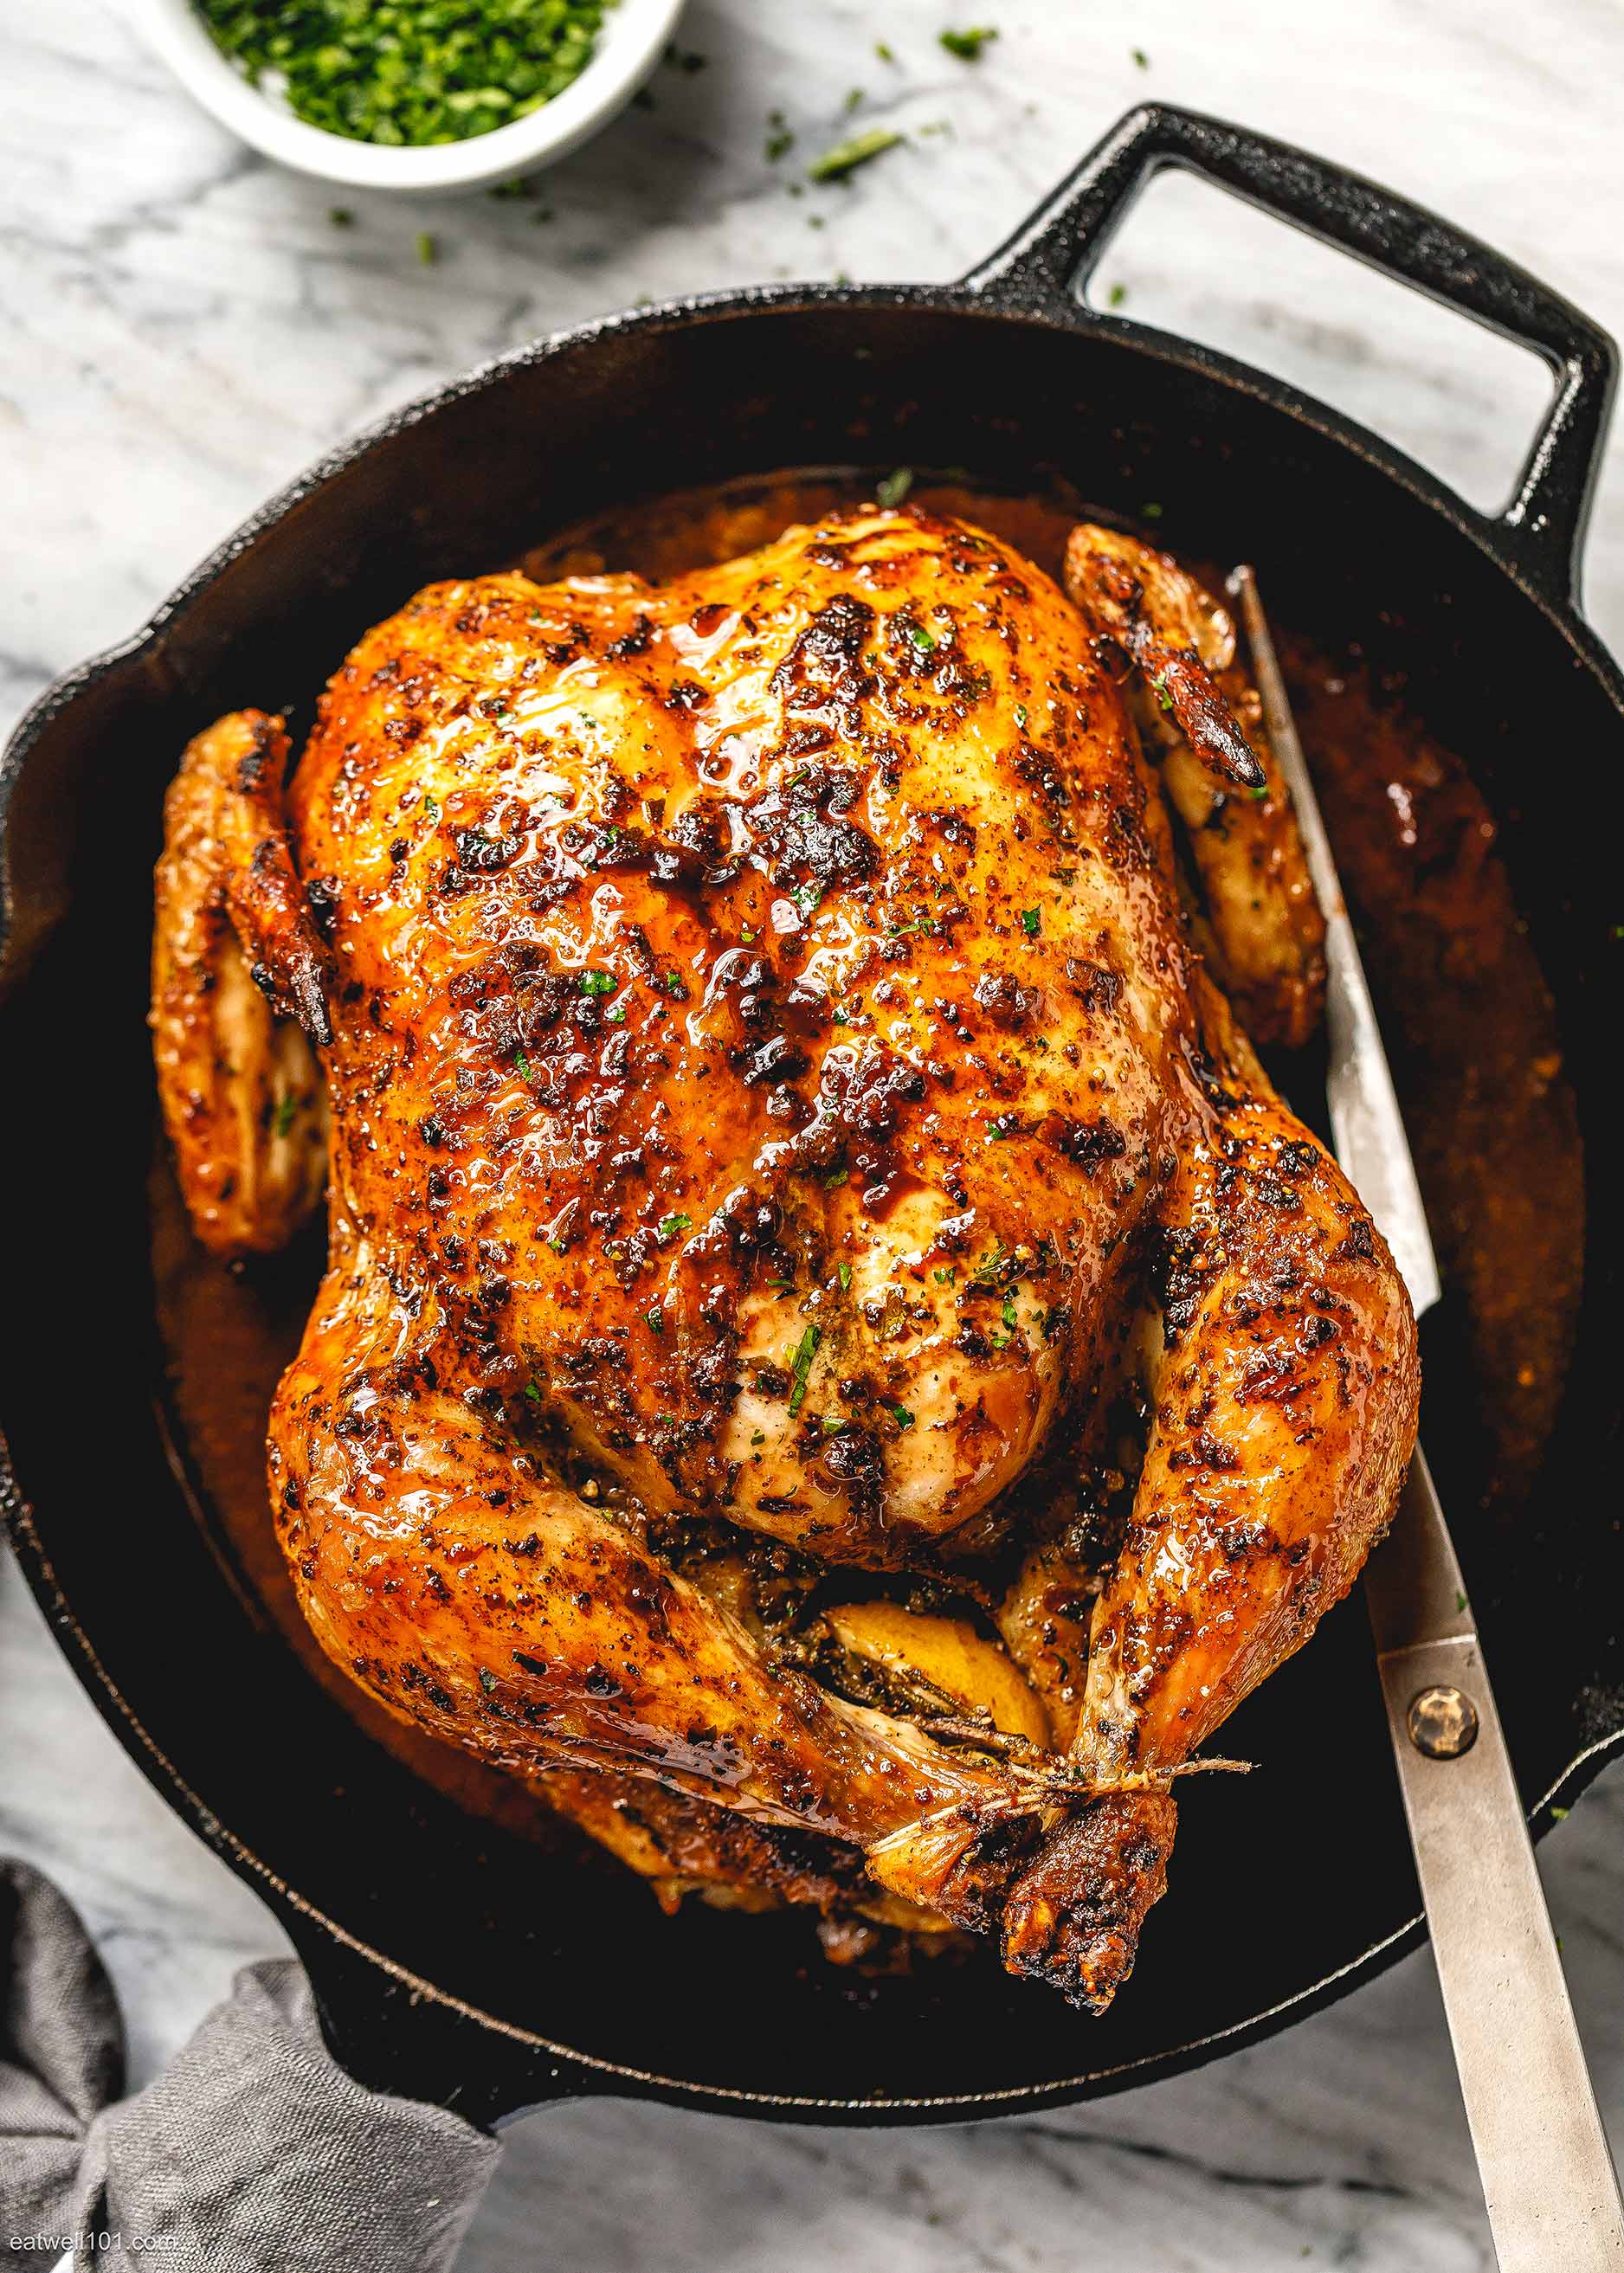 Delicious Baking A whole Chicken – 15 Recipes for Great Collections